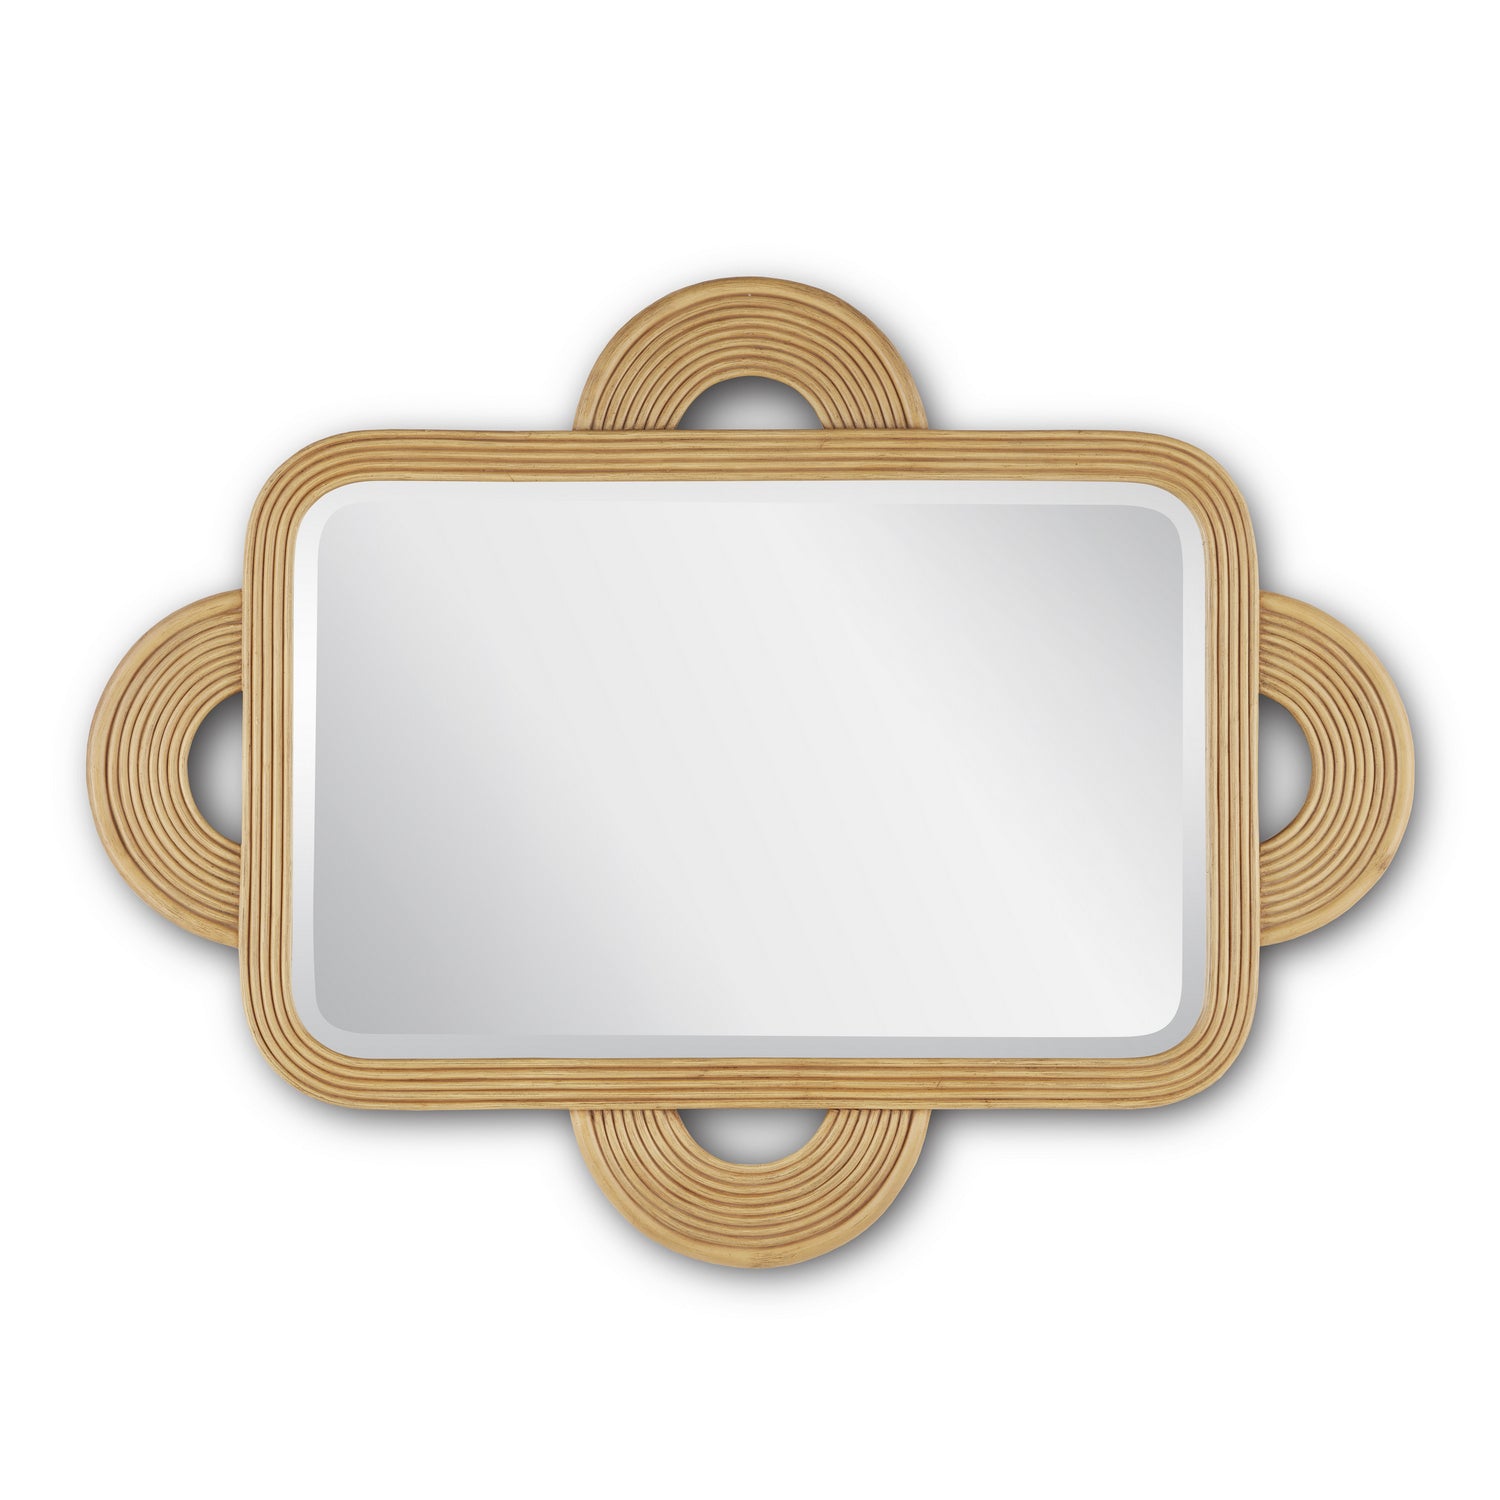 Mirror from the Santos collection in Sea Sand/Mirror finish